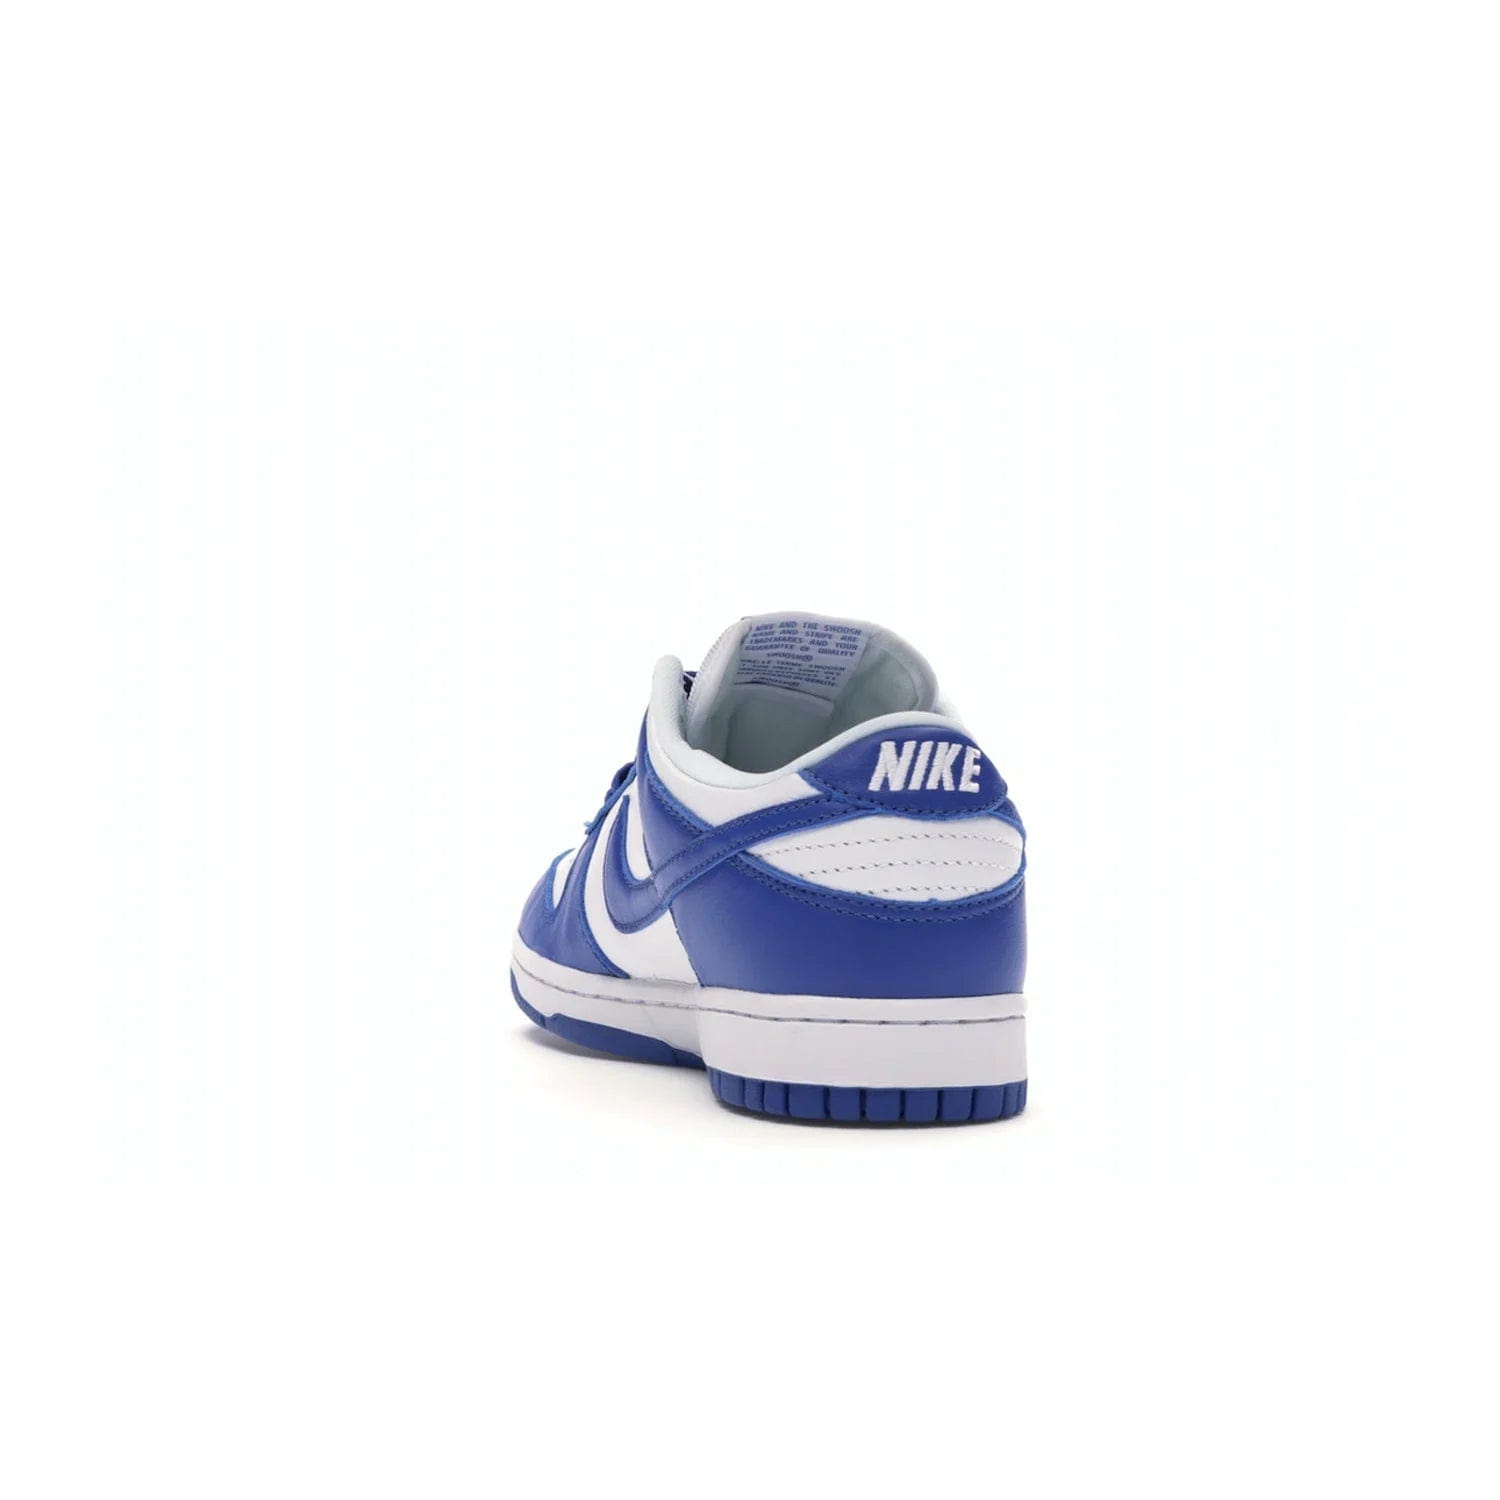 Nike Dunk Low SP Kentucky (2020/2022) - Image 26 - Only at www.BallersClubKickz.com - Classic Nike Dunk Low SP Kentucky with timeless White/Varsity Royal colorway. White leather upper, royal outsole, and Nike branding. A hit since March 2020 homage to the 1985 Nike College Colors program. Show your support with these classic kicks.